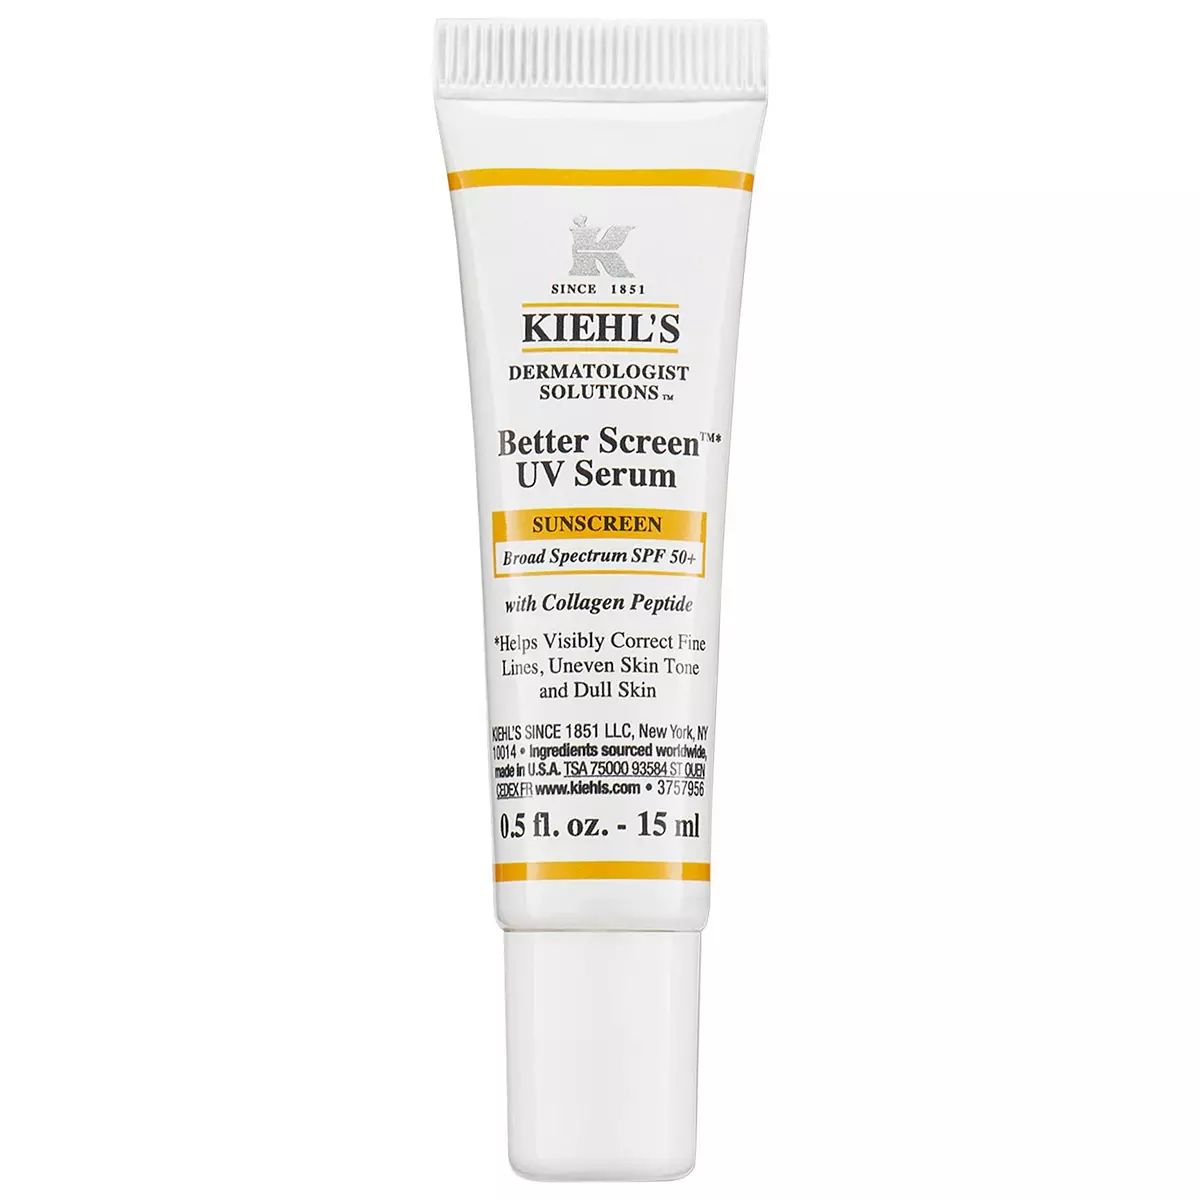 Kiehl's Since 1851 Better Screen UV Serum SPF 50+ Facial Sunscreen with Collagen Peptide | Kohl's